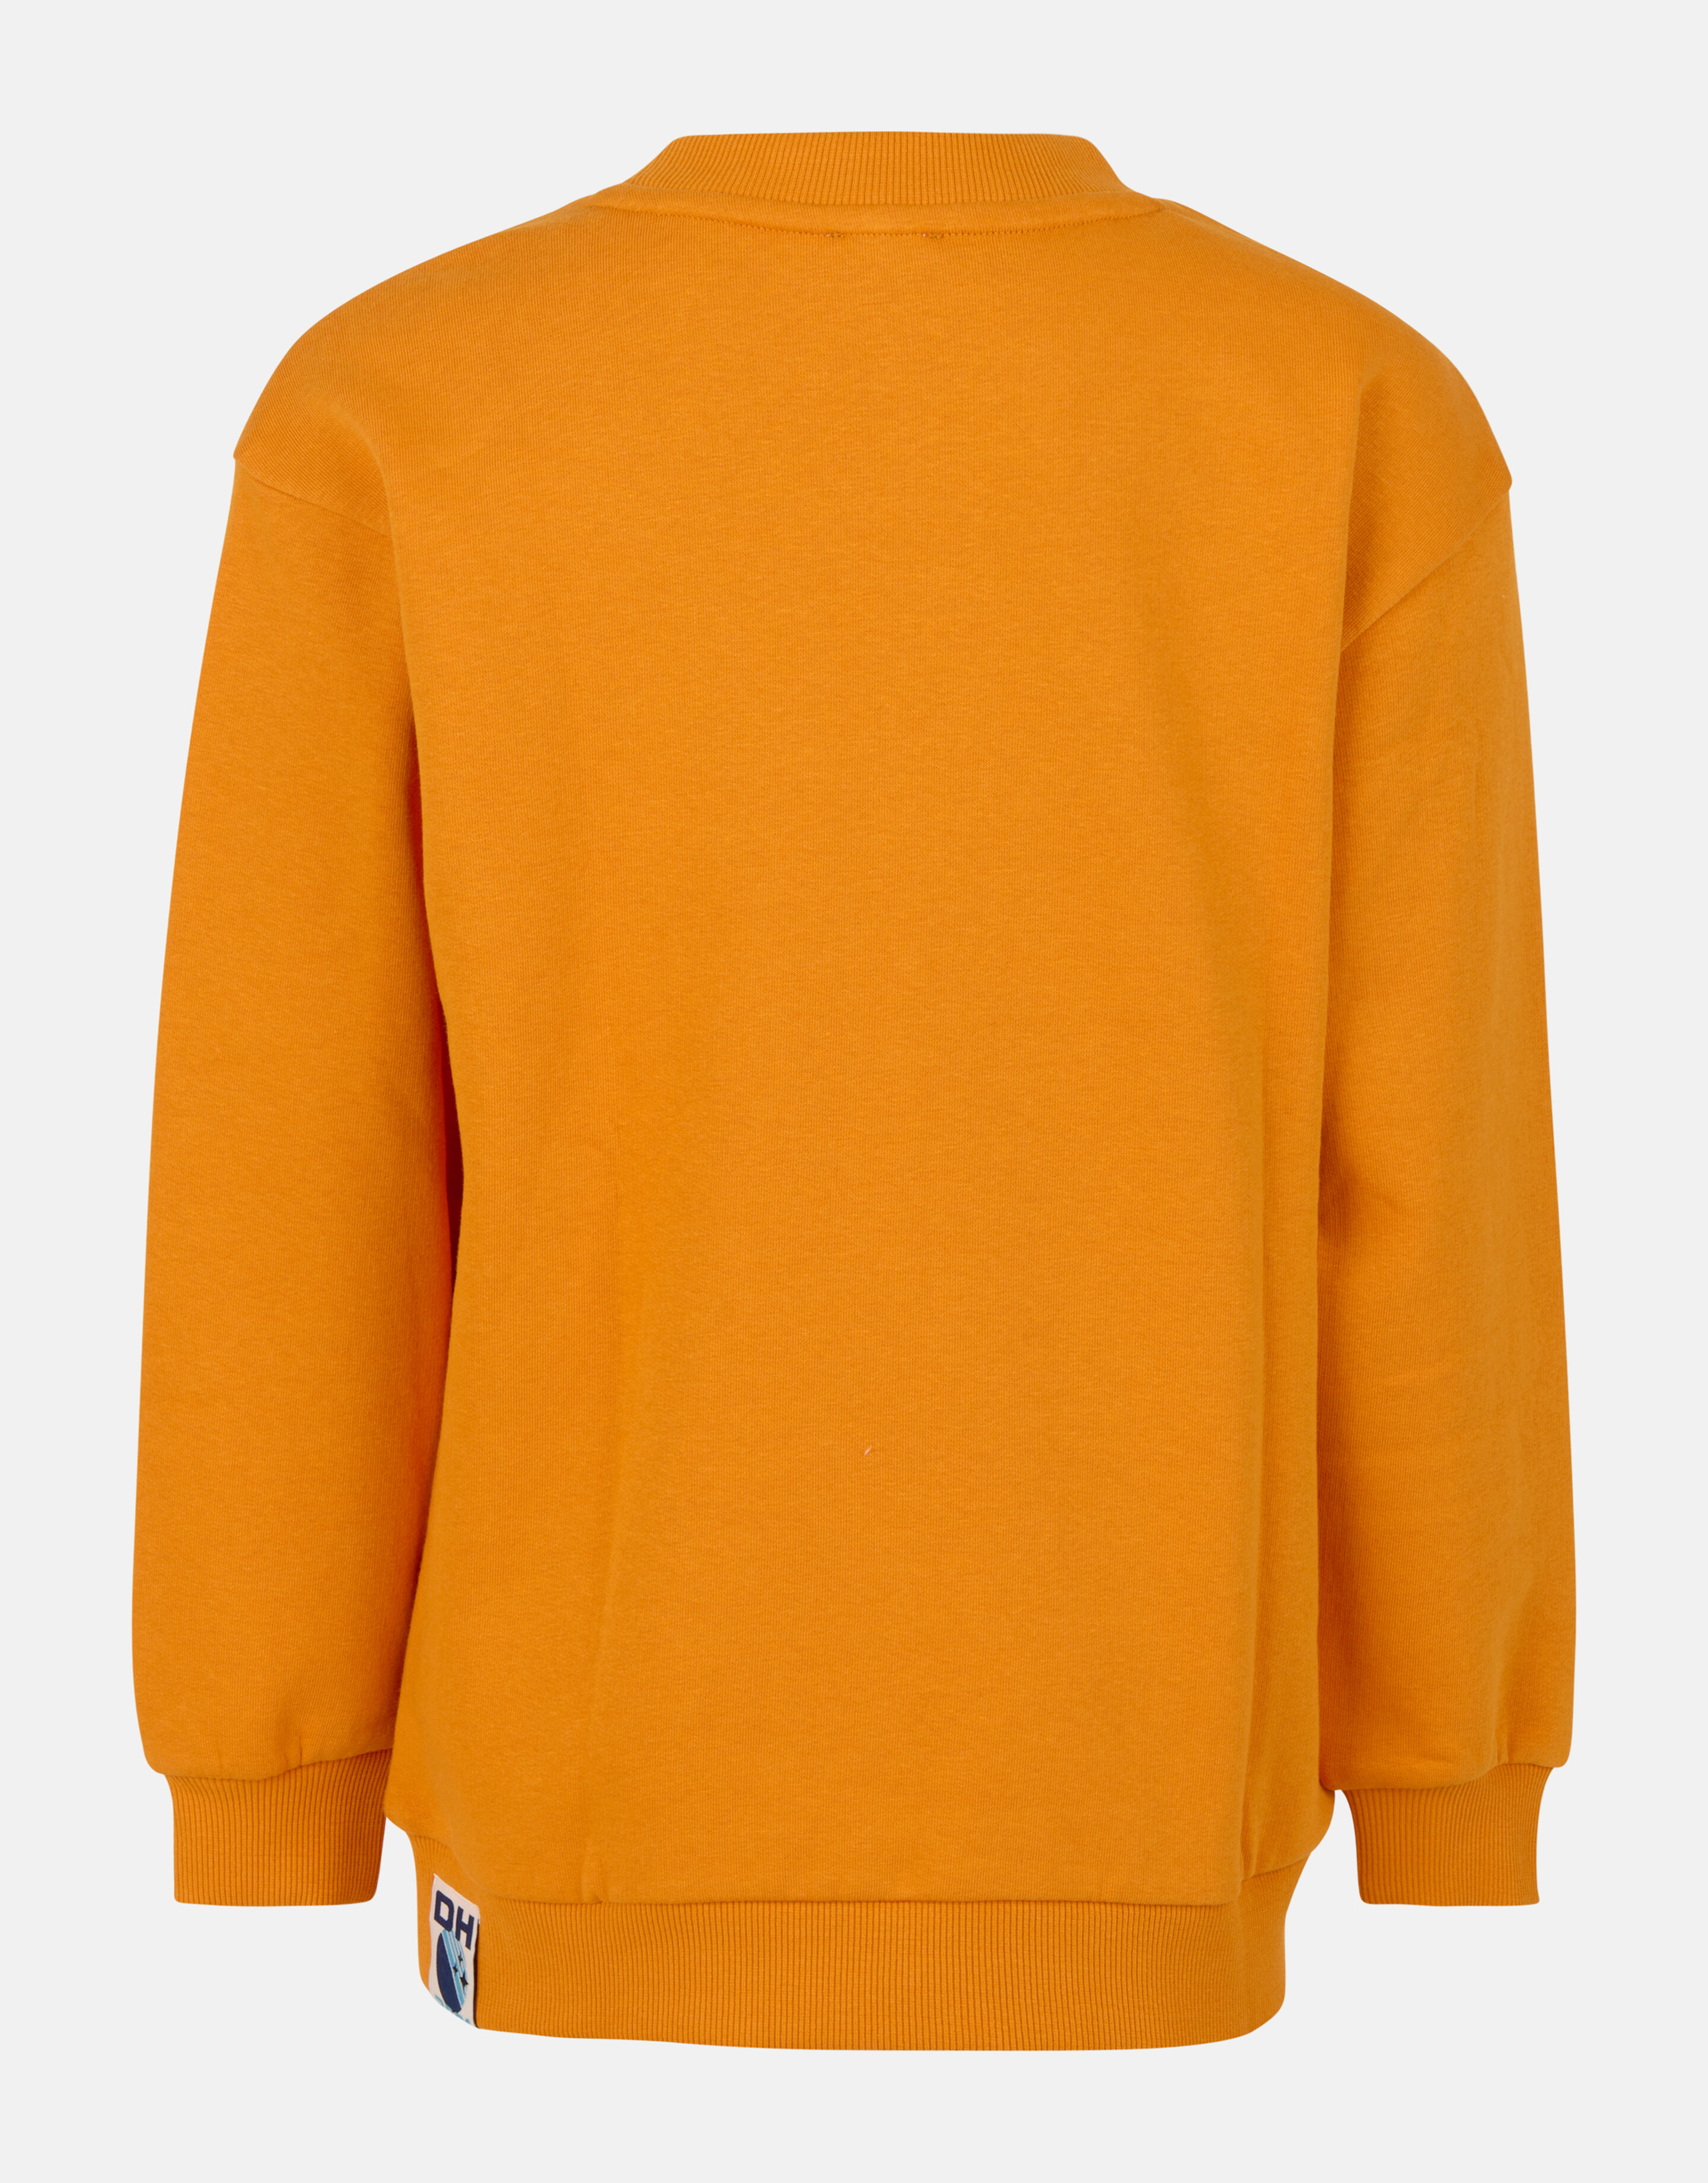 Sweater By Dylan SHOEBY BOYS